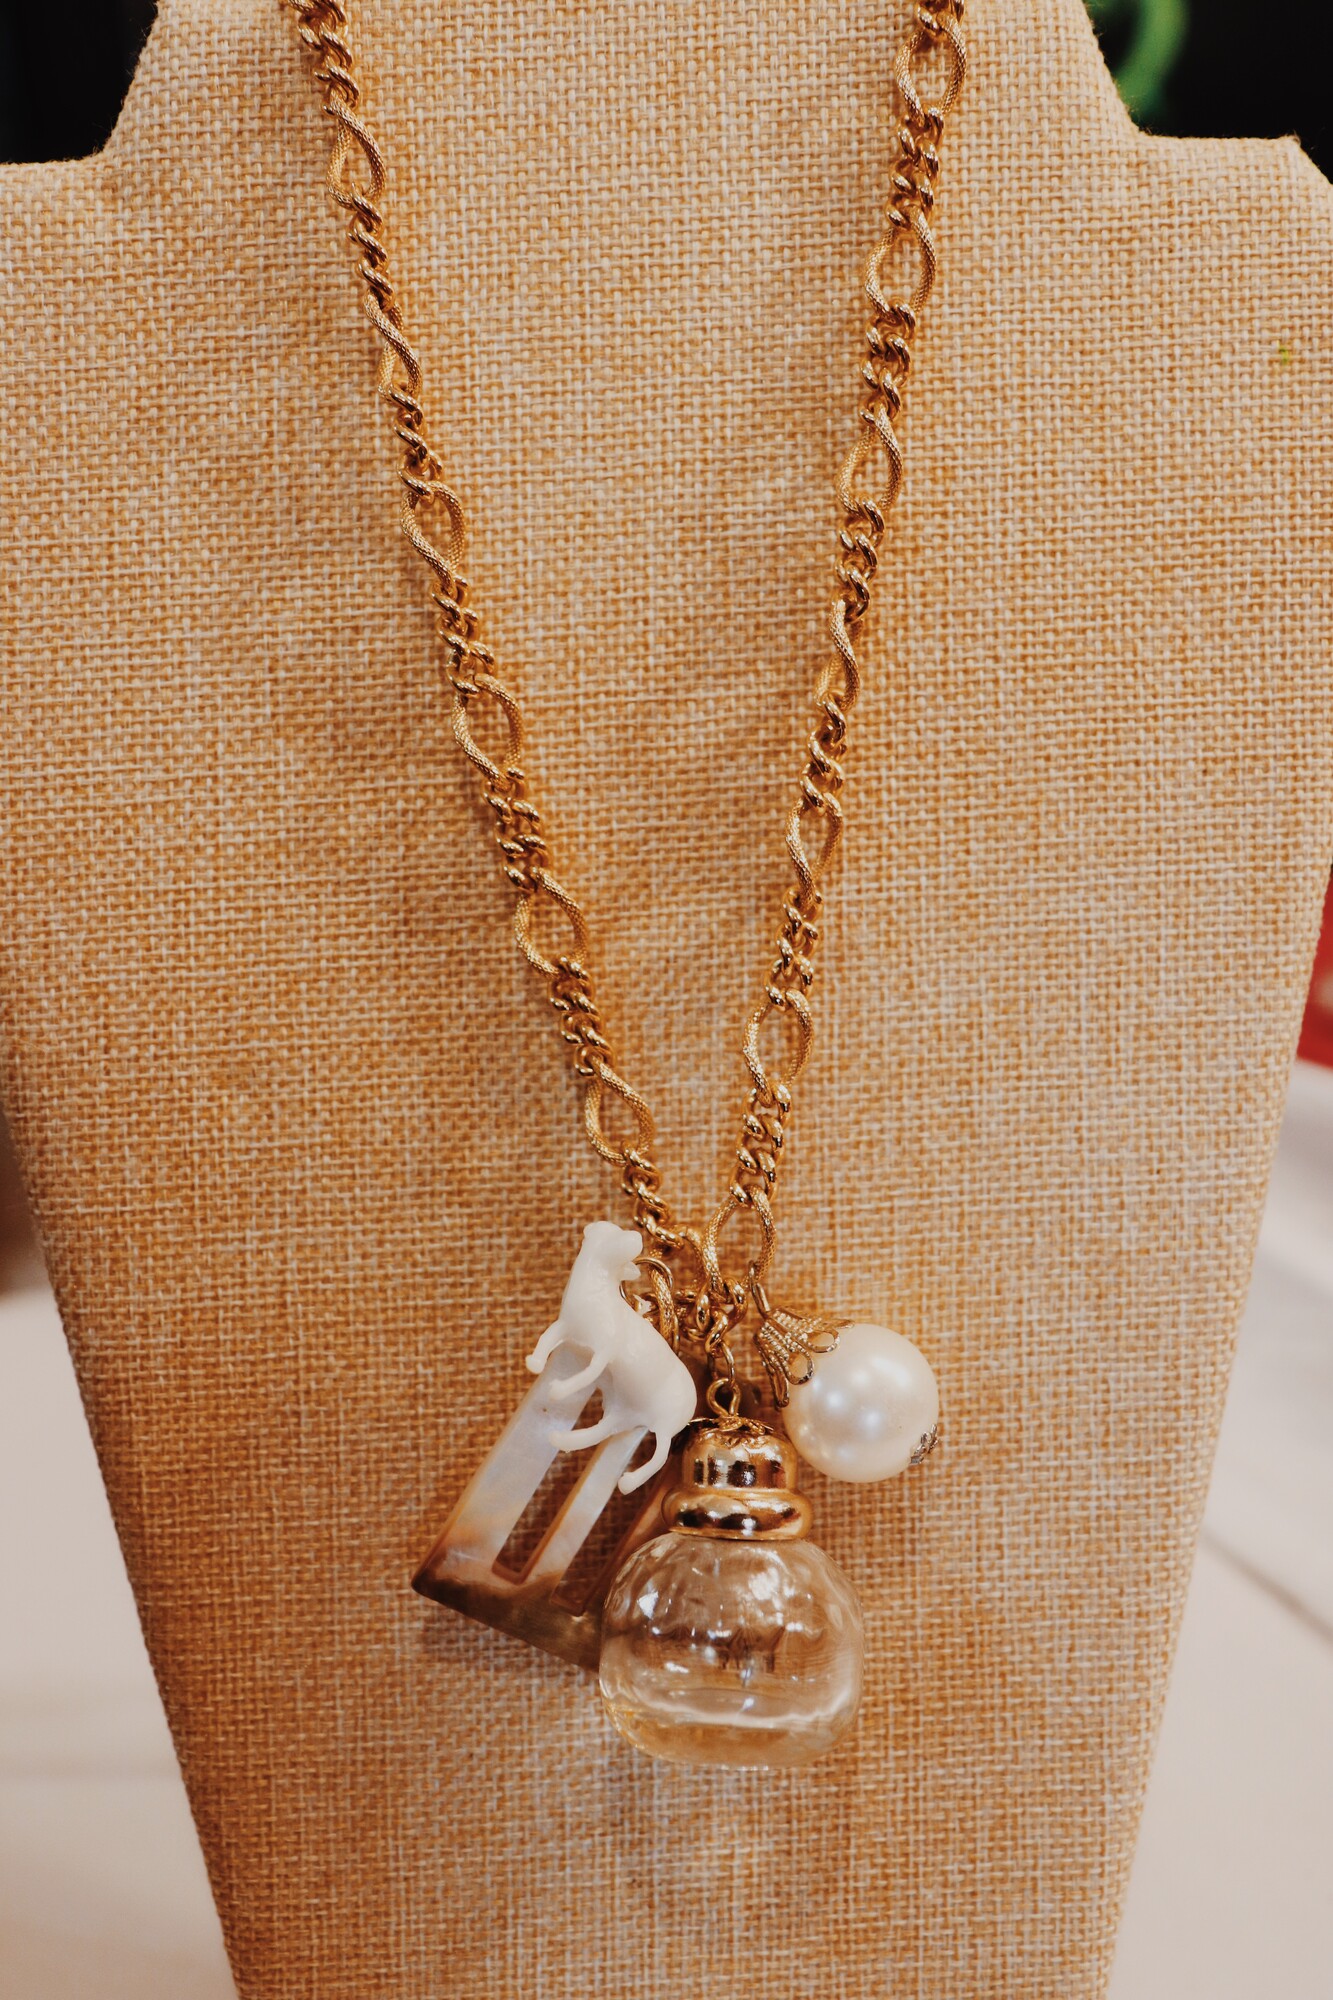 This one of a kind Kelli Hawk Designs necklace has a farm animal, an iridescent buckle, a vintage perfume bottle, and a pearl as the centerpieces. This hangs on a 18 inch chain.